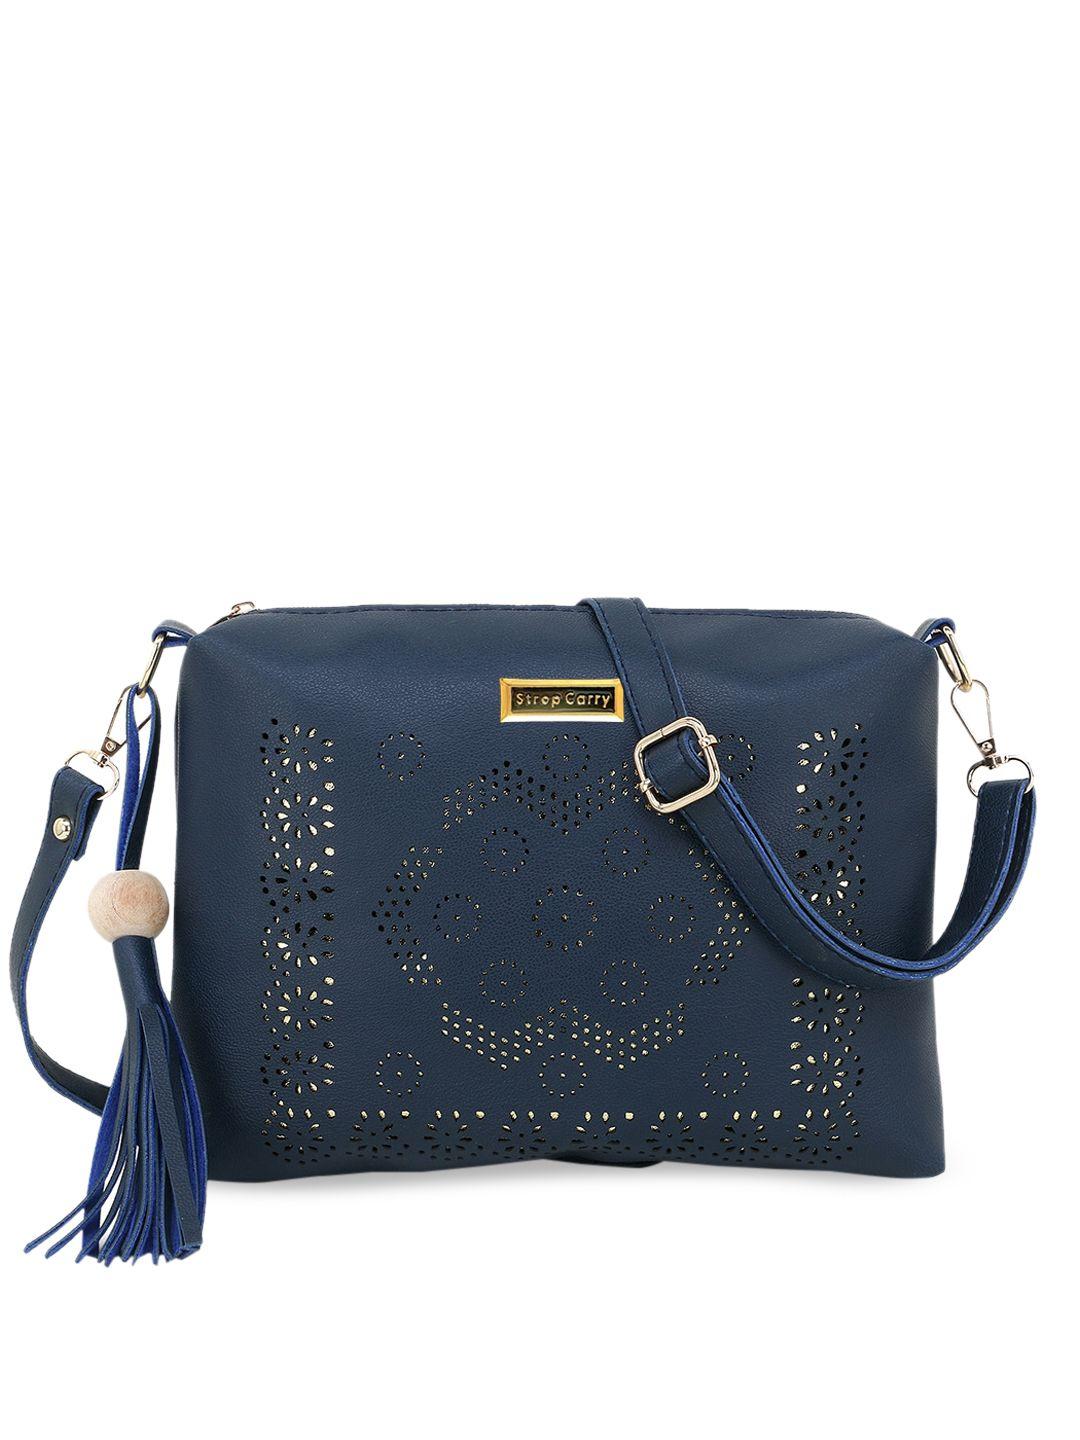 stropcarry blue structured sling bag with tasselled